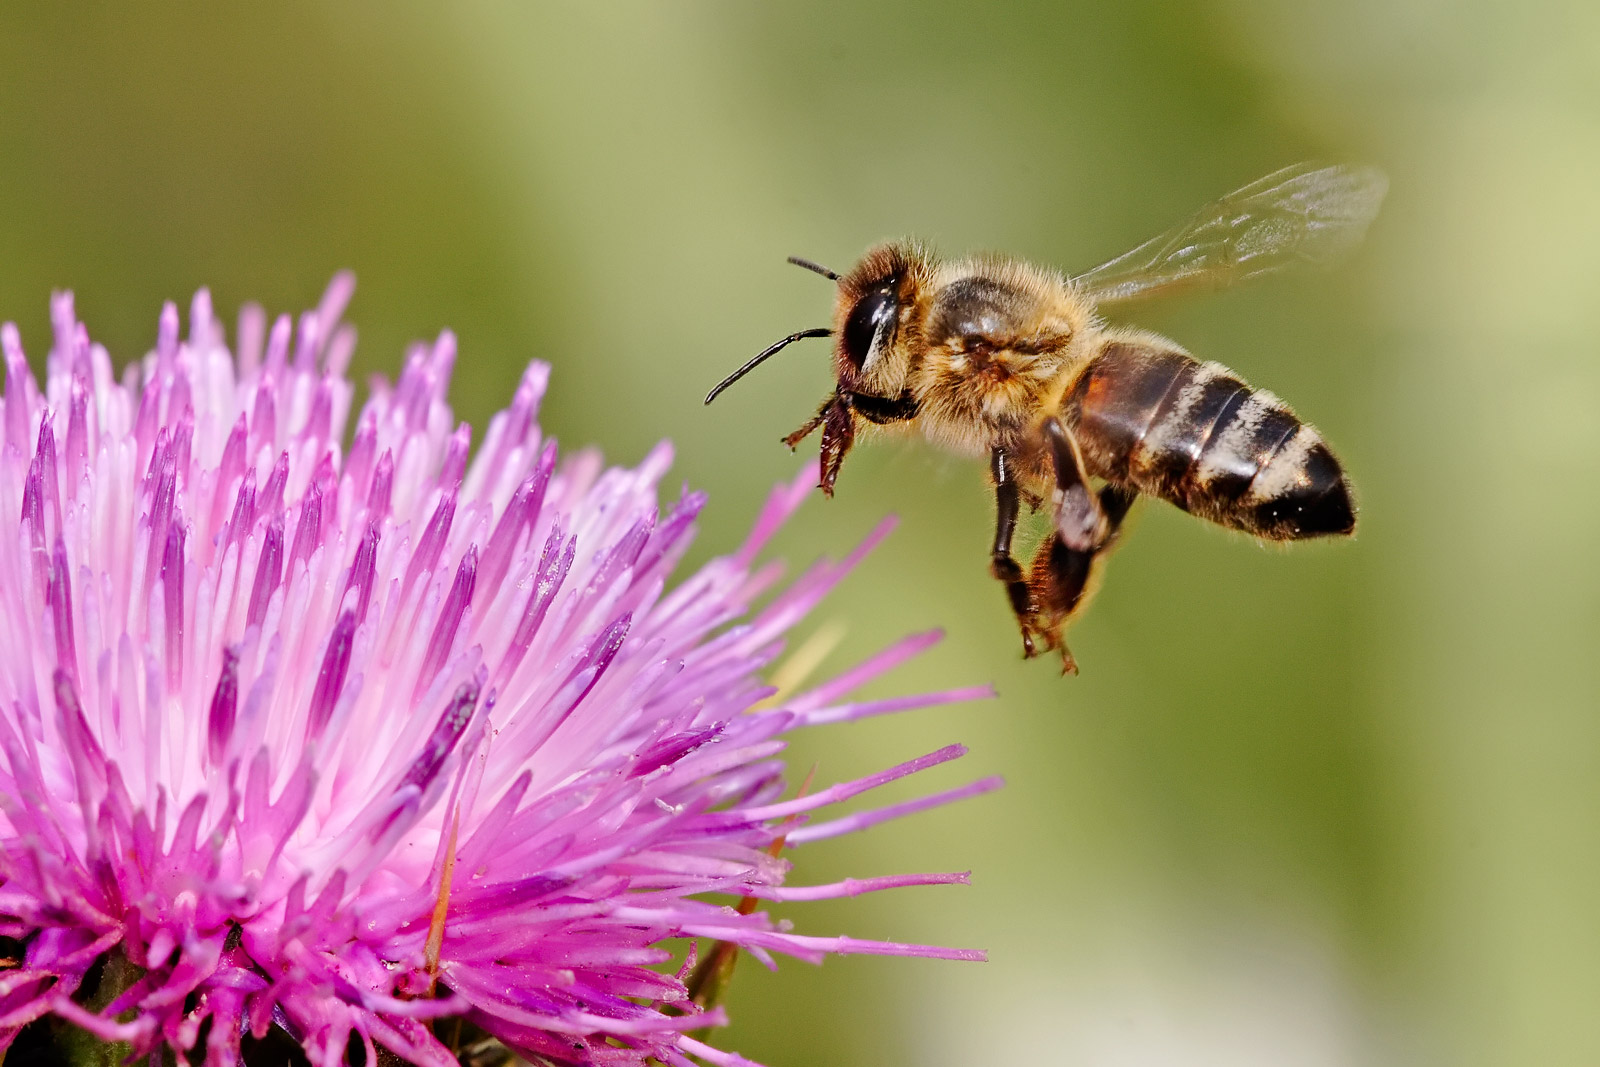 No Bees, No Food!  Get Educated with Heller Nature Center